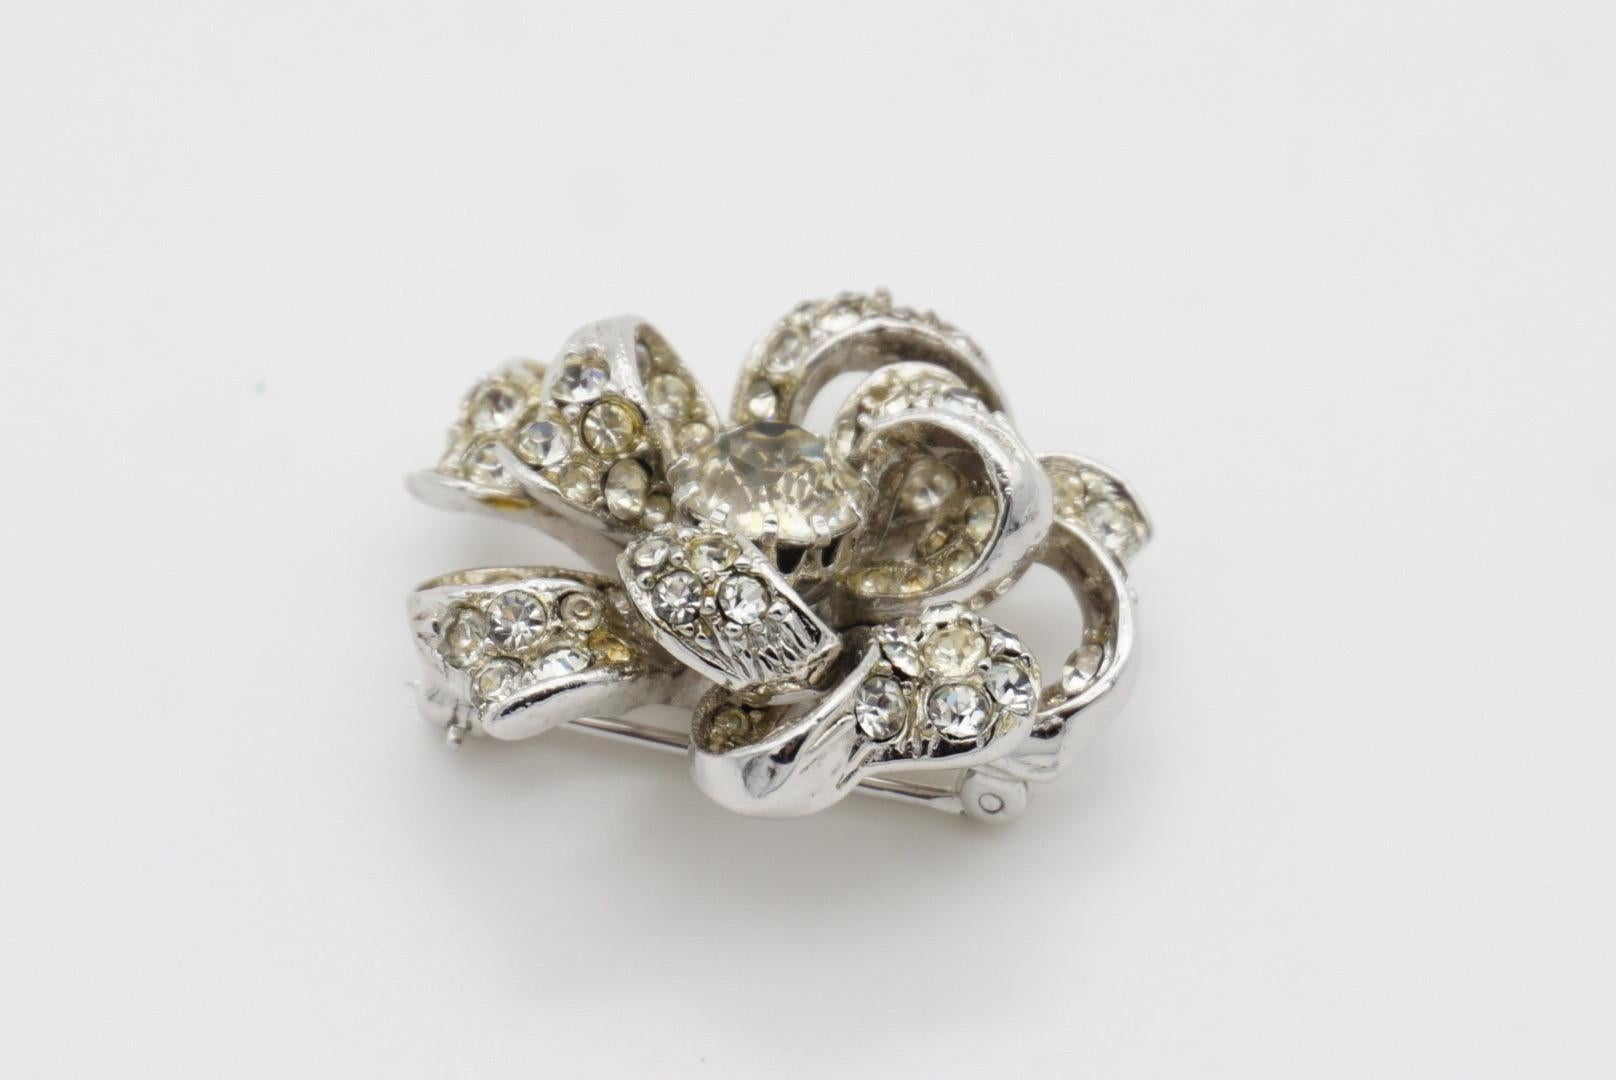 Christian Dior by Mitchel Maer for Christian Dior for Christian Dior for Christian Dior for Christian Dior by Mitchel Maer for Christian Dior for Christian Dior 1950s Crystals Double Layer Flower Silver Brooch en vente 6